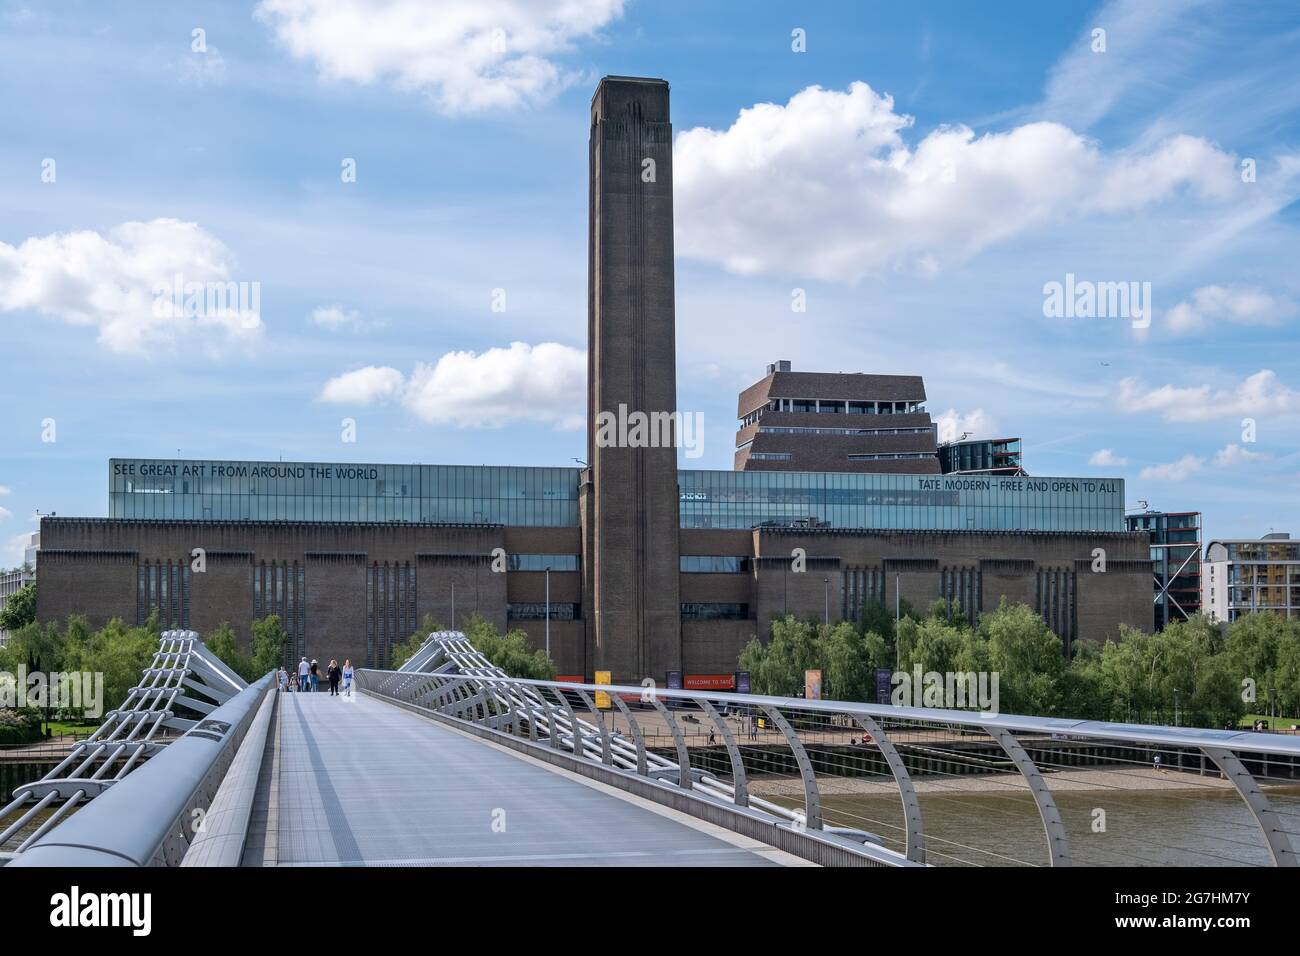 Tate Modern art gallery, from Millennium Bridge, formerly the Bankside Power Station designed by Sir Giles Gilbert Scott completed in 1947 Stock Photo